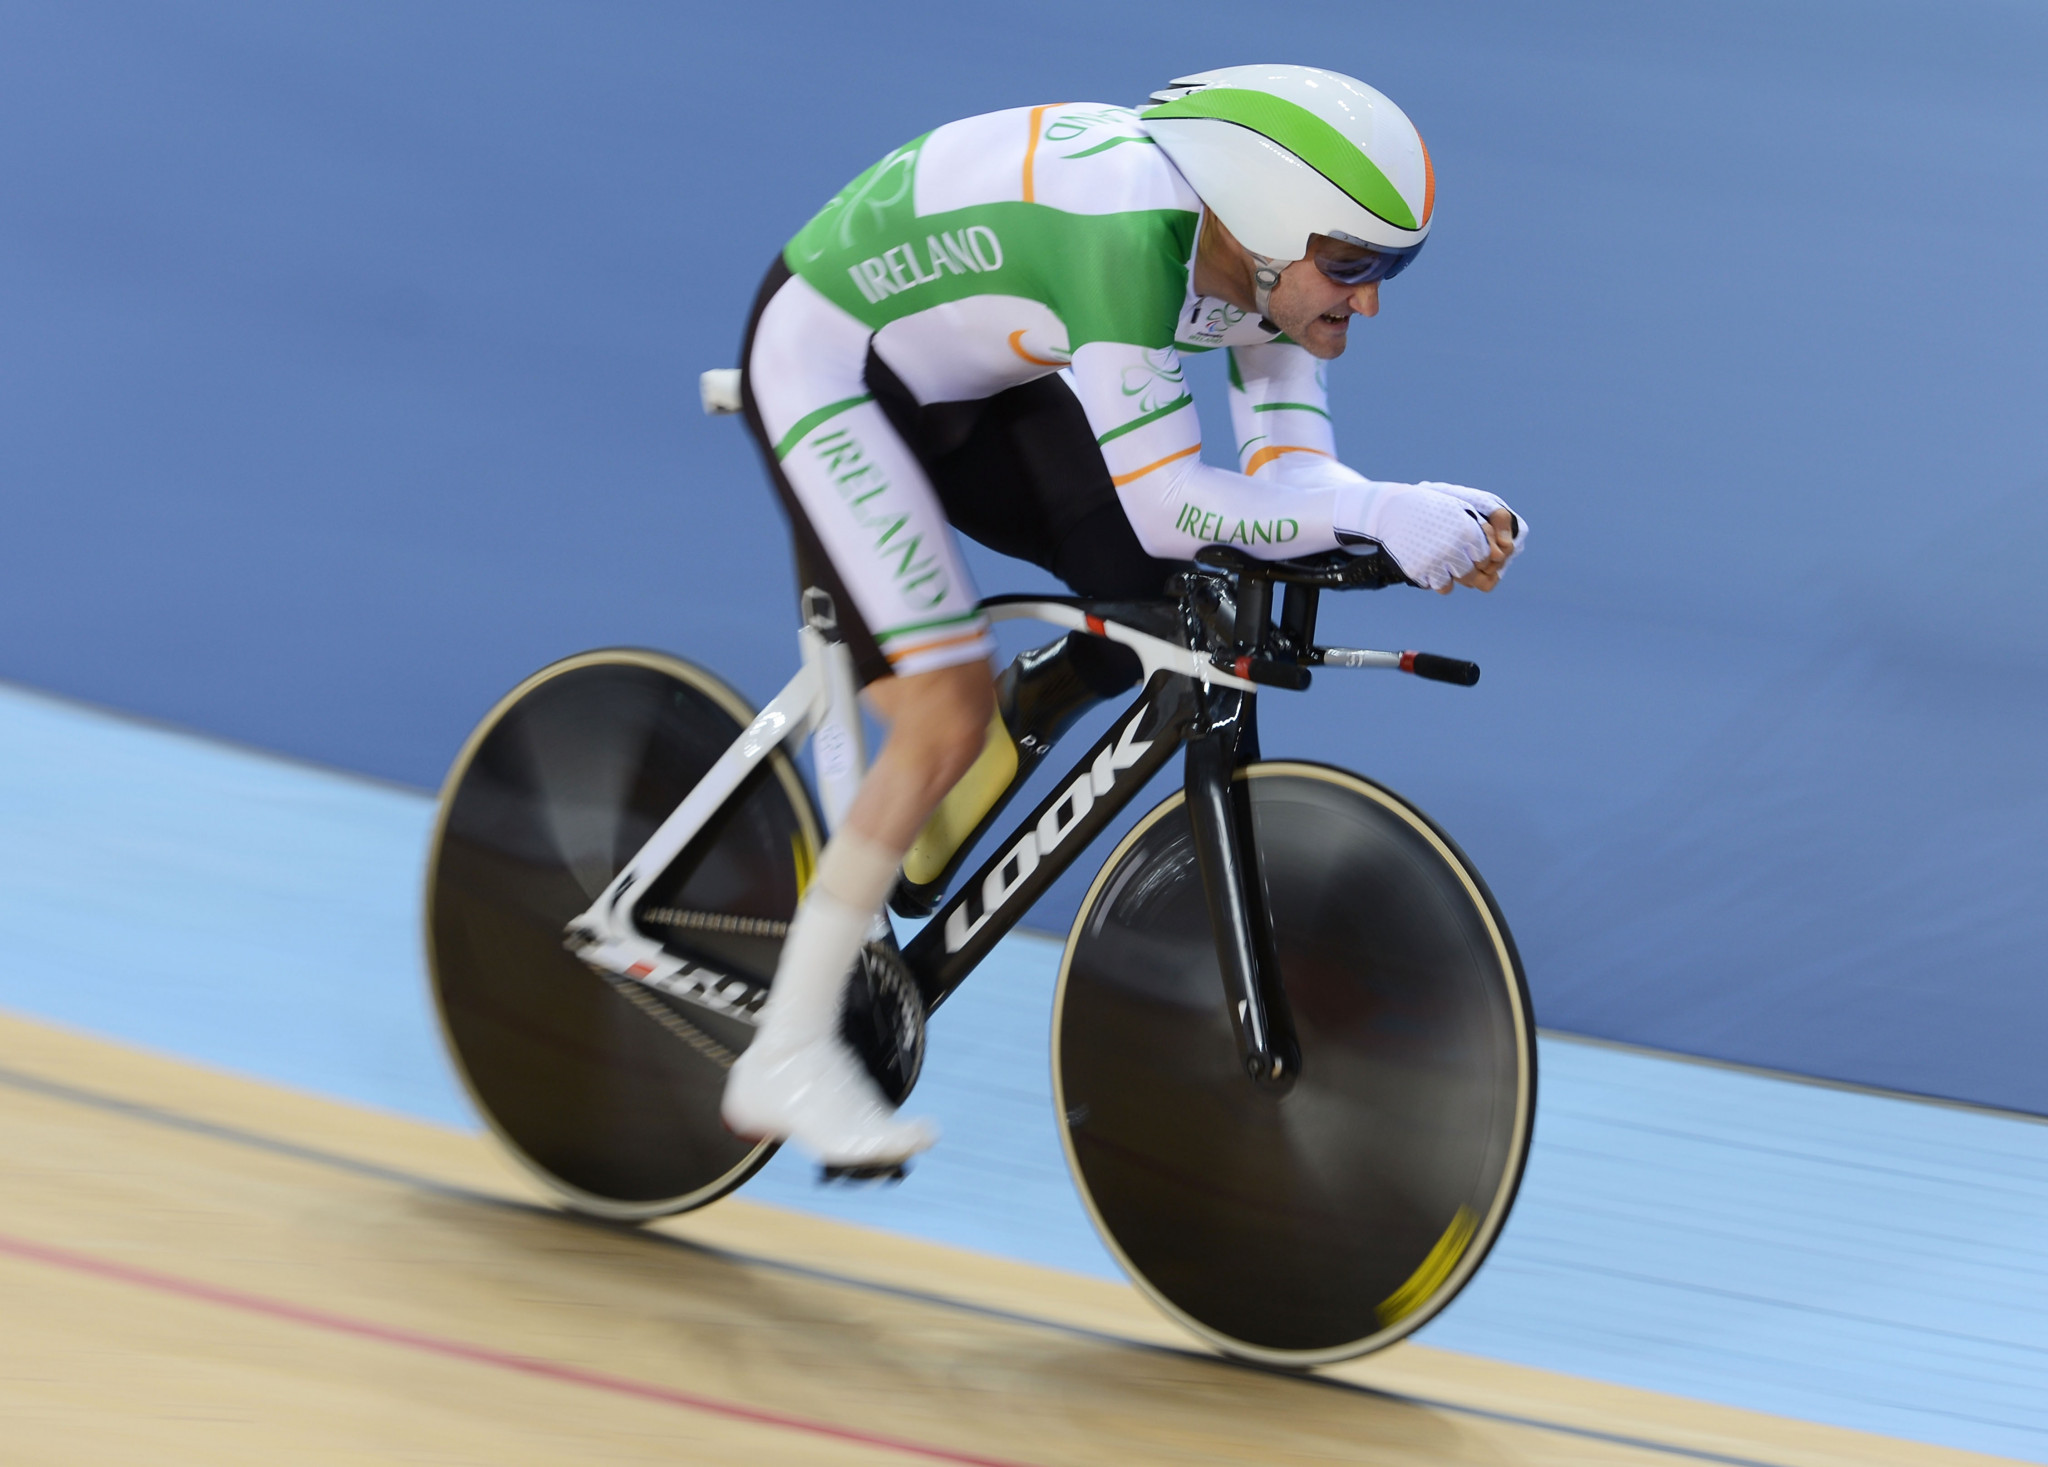 Ireland’s multiple Para-cycling champion and history man Lynch announces retirement aged 48 